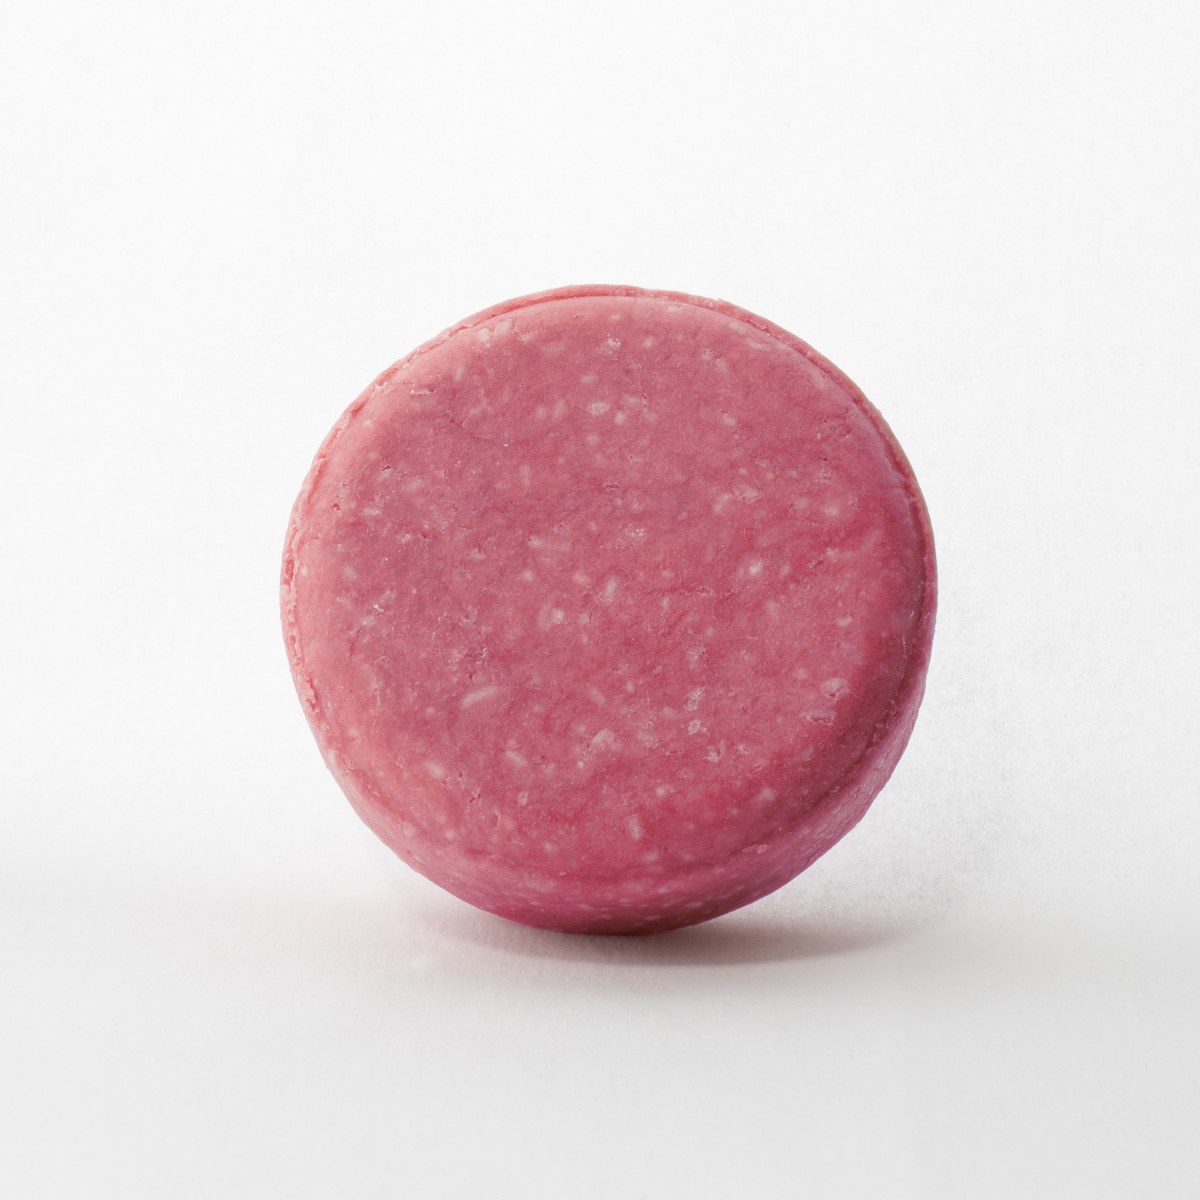 a close up of a pink round object on a white background